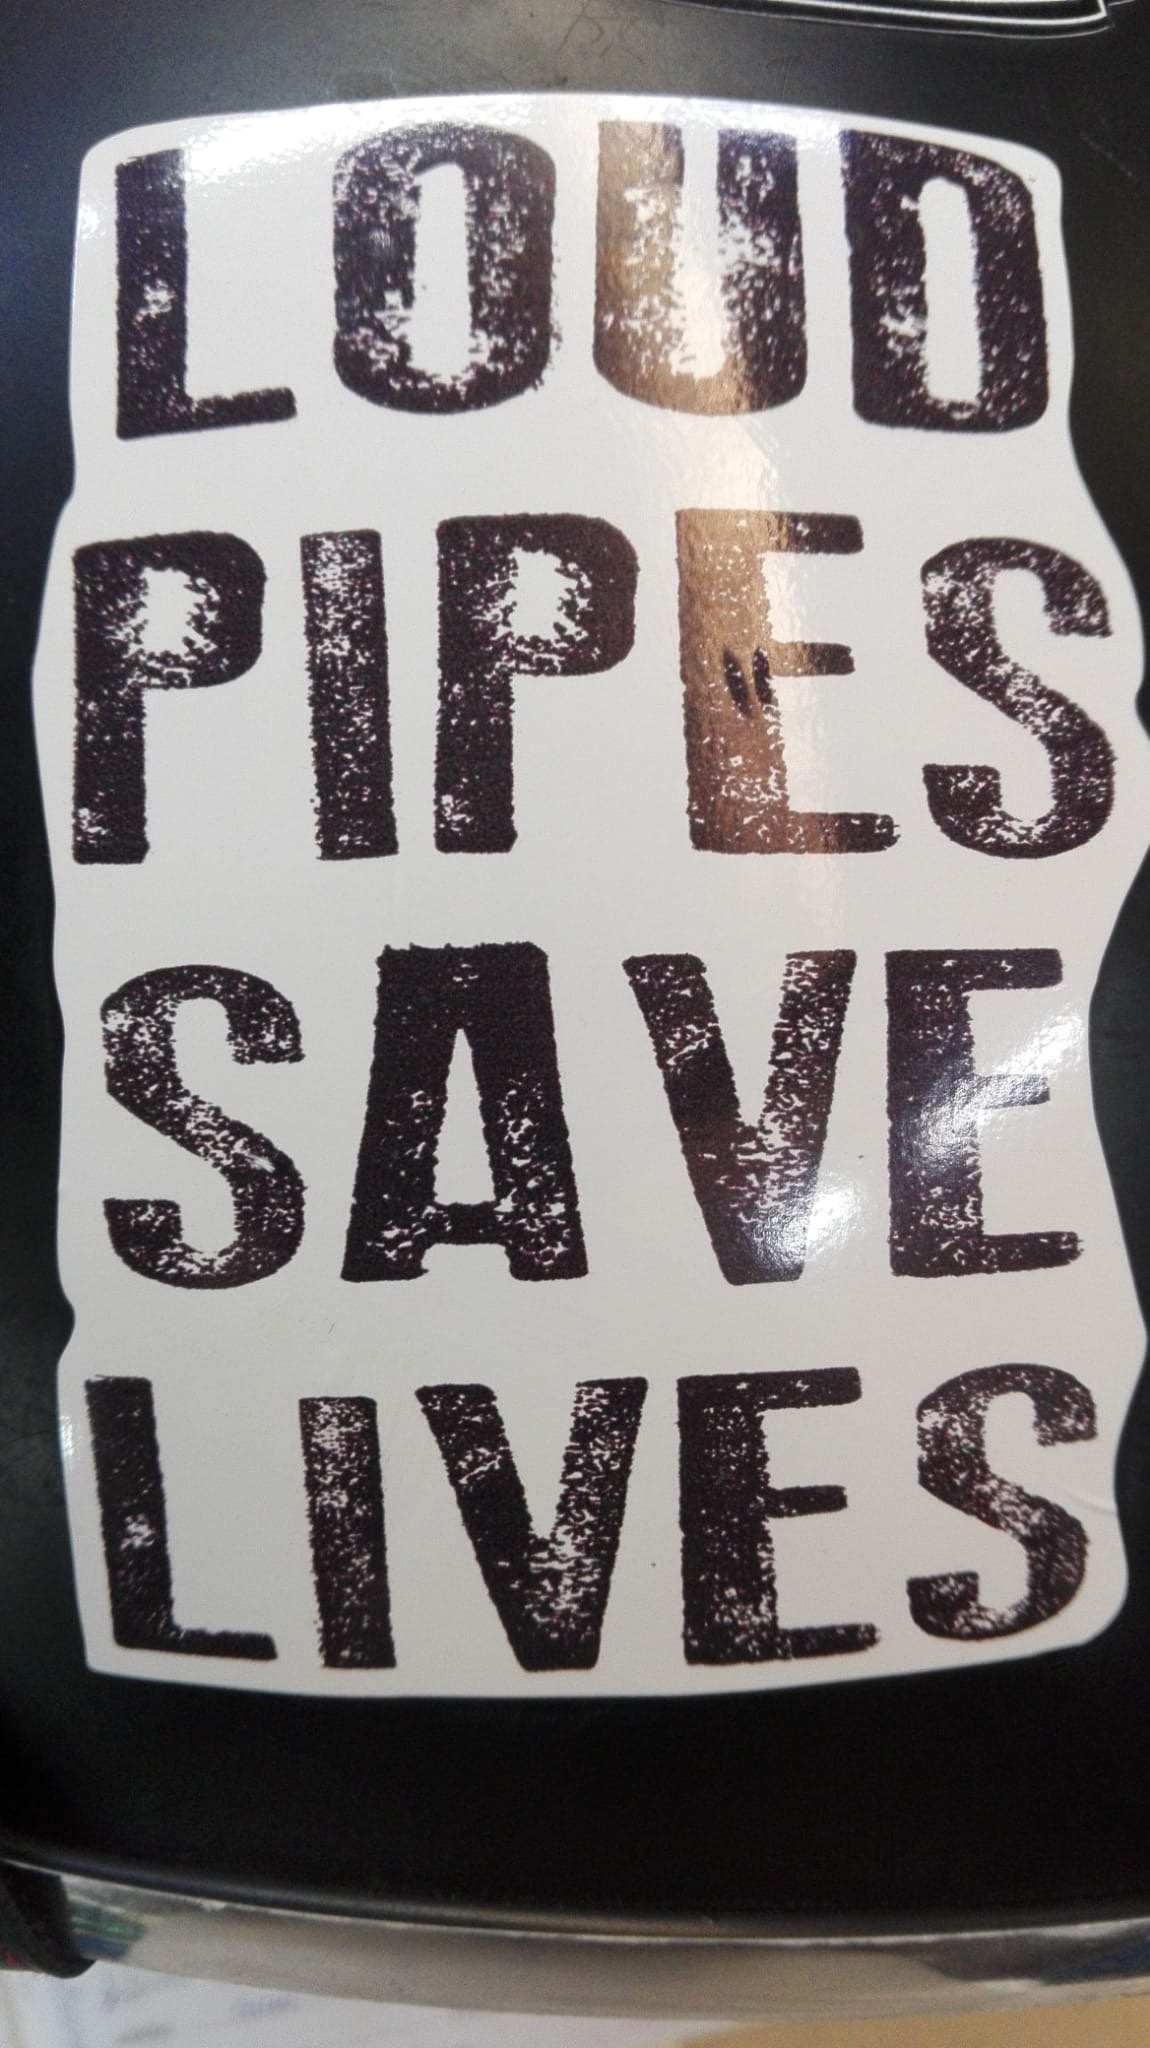 Loud Pipes Save Lives by Jennifer Giacalone